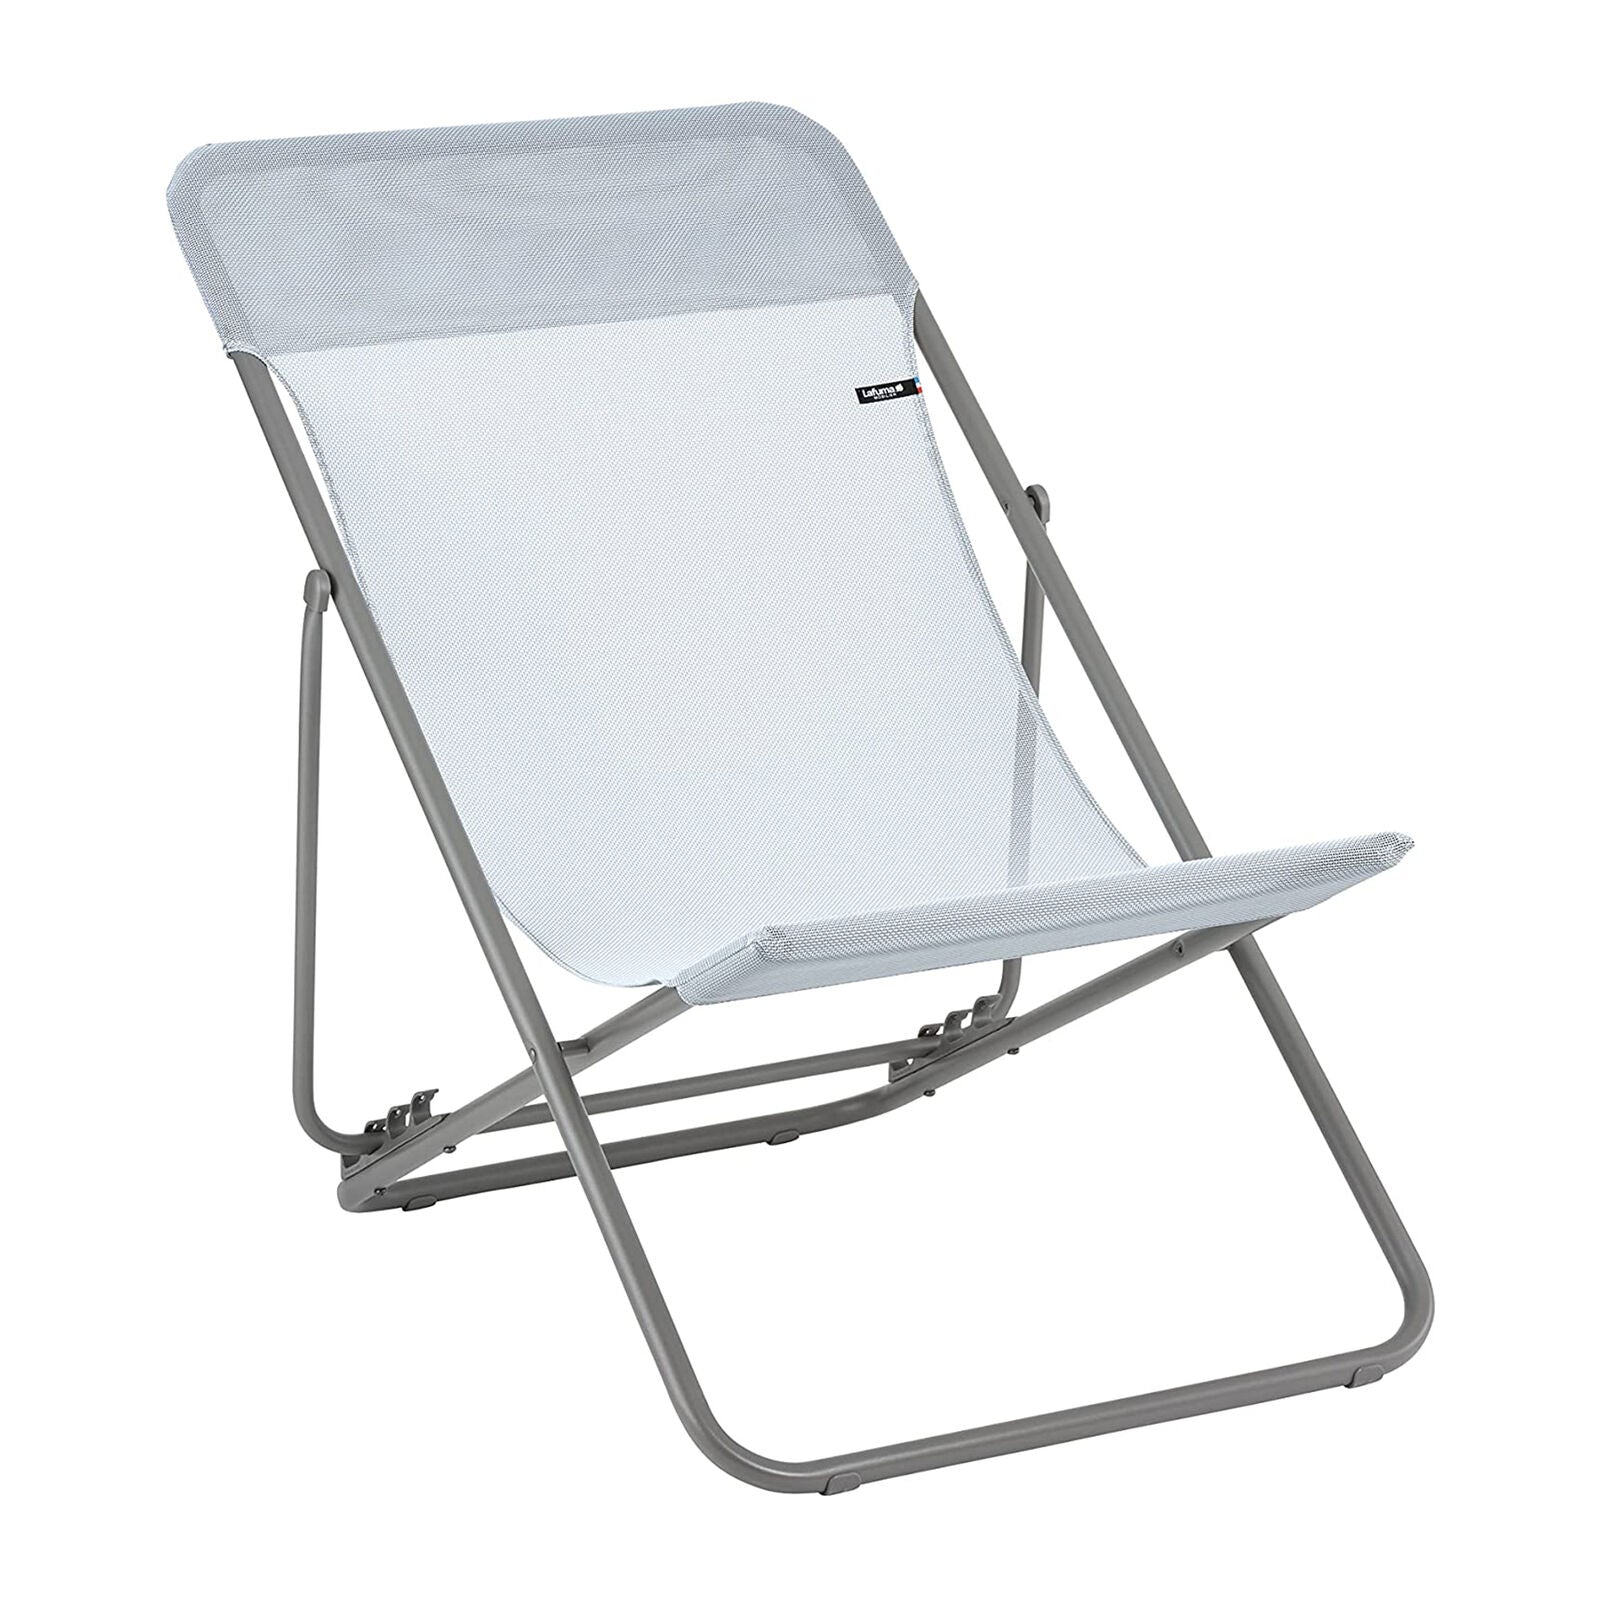 Folding Chair With 4 Reclining Positions - Zero Gravity Camping Chair